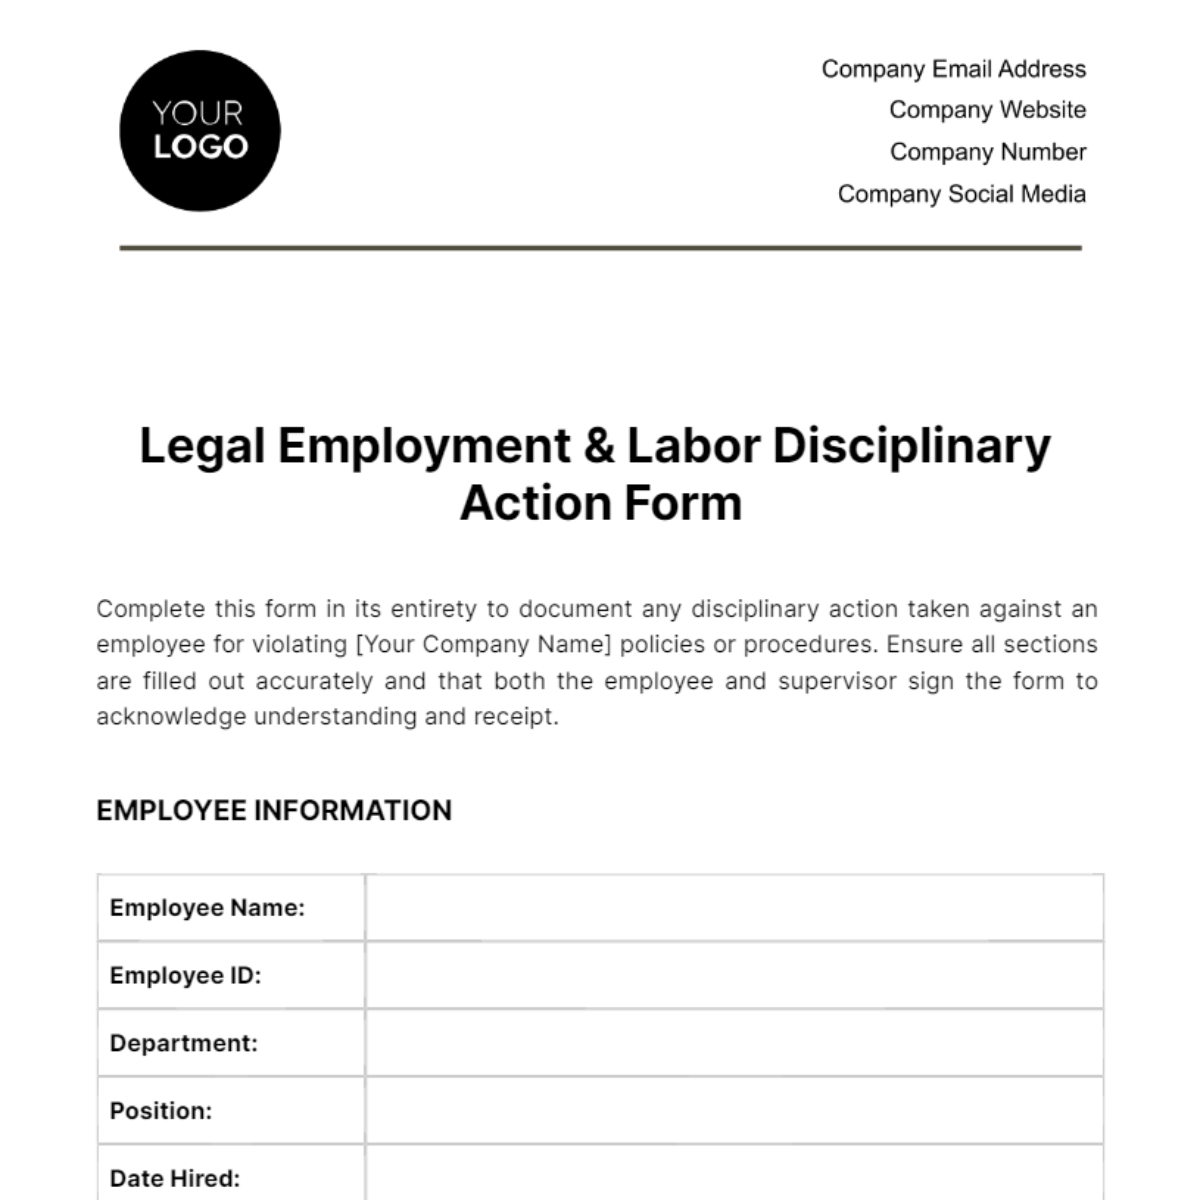 Free Legal Employment & Labor Disciplinary Action Form Template